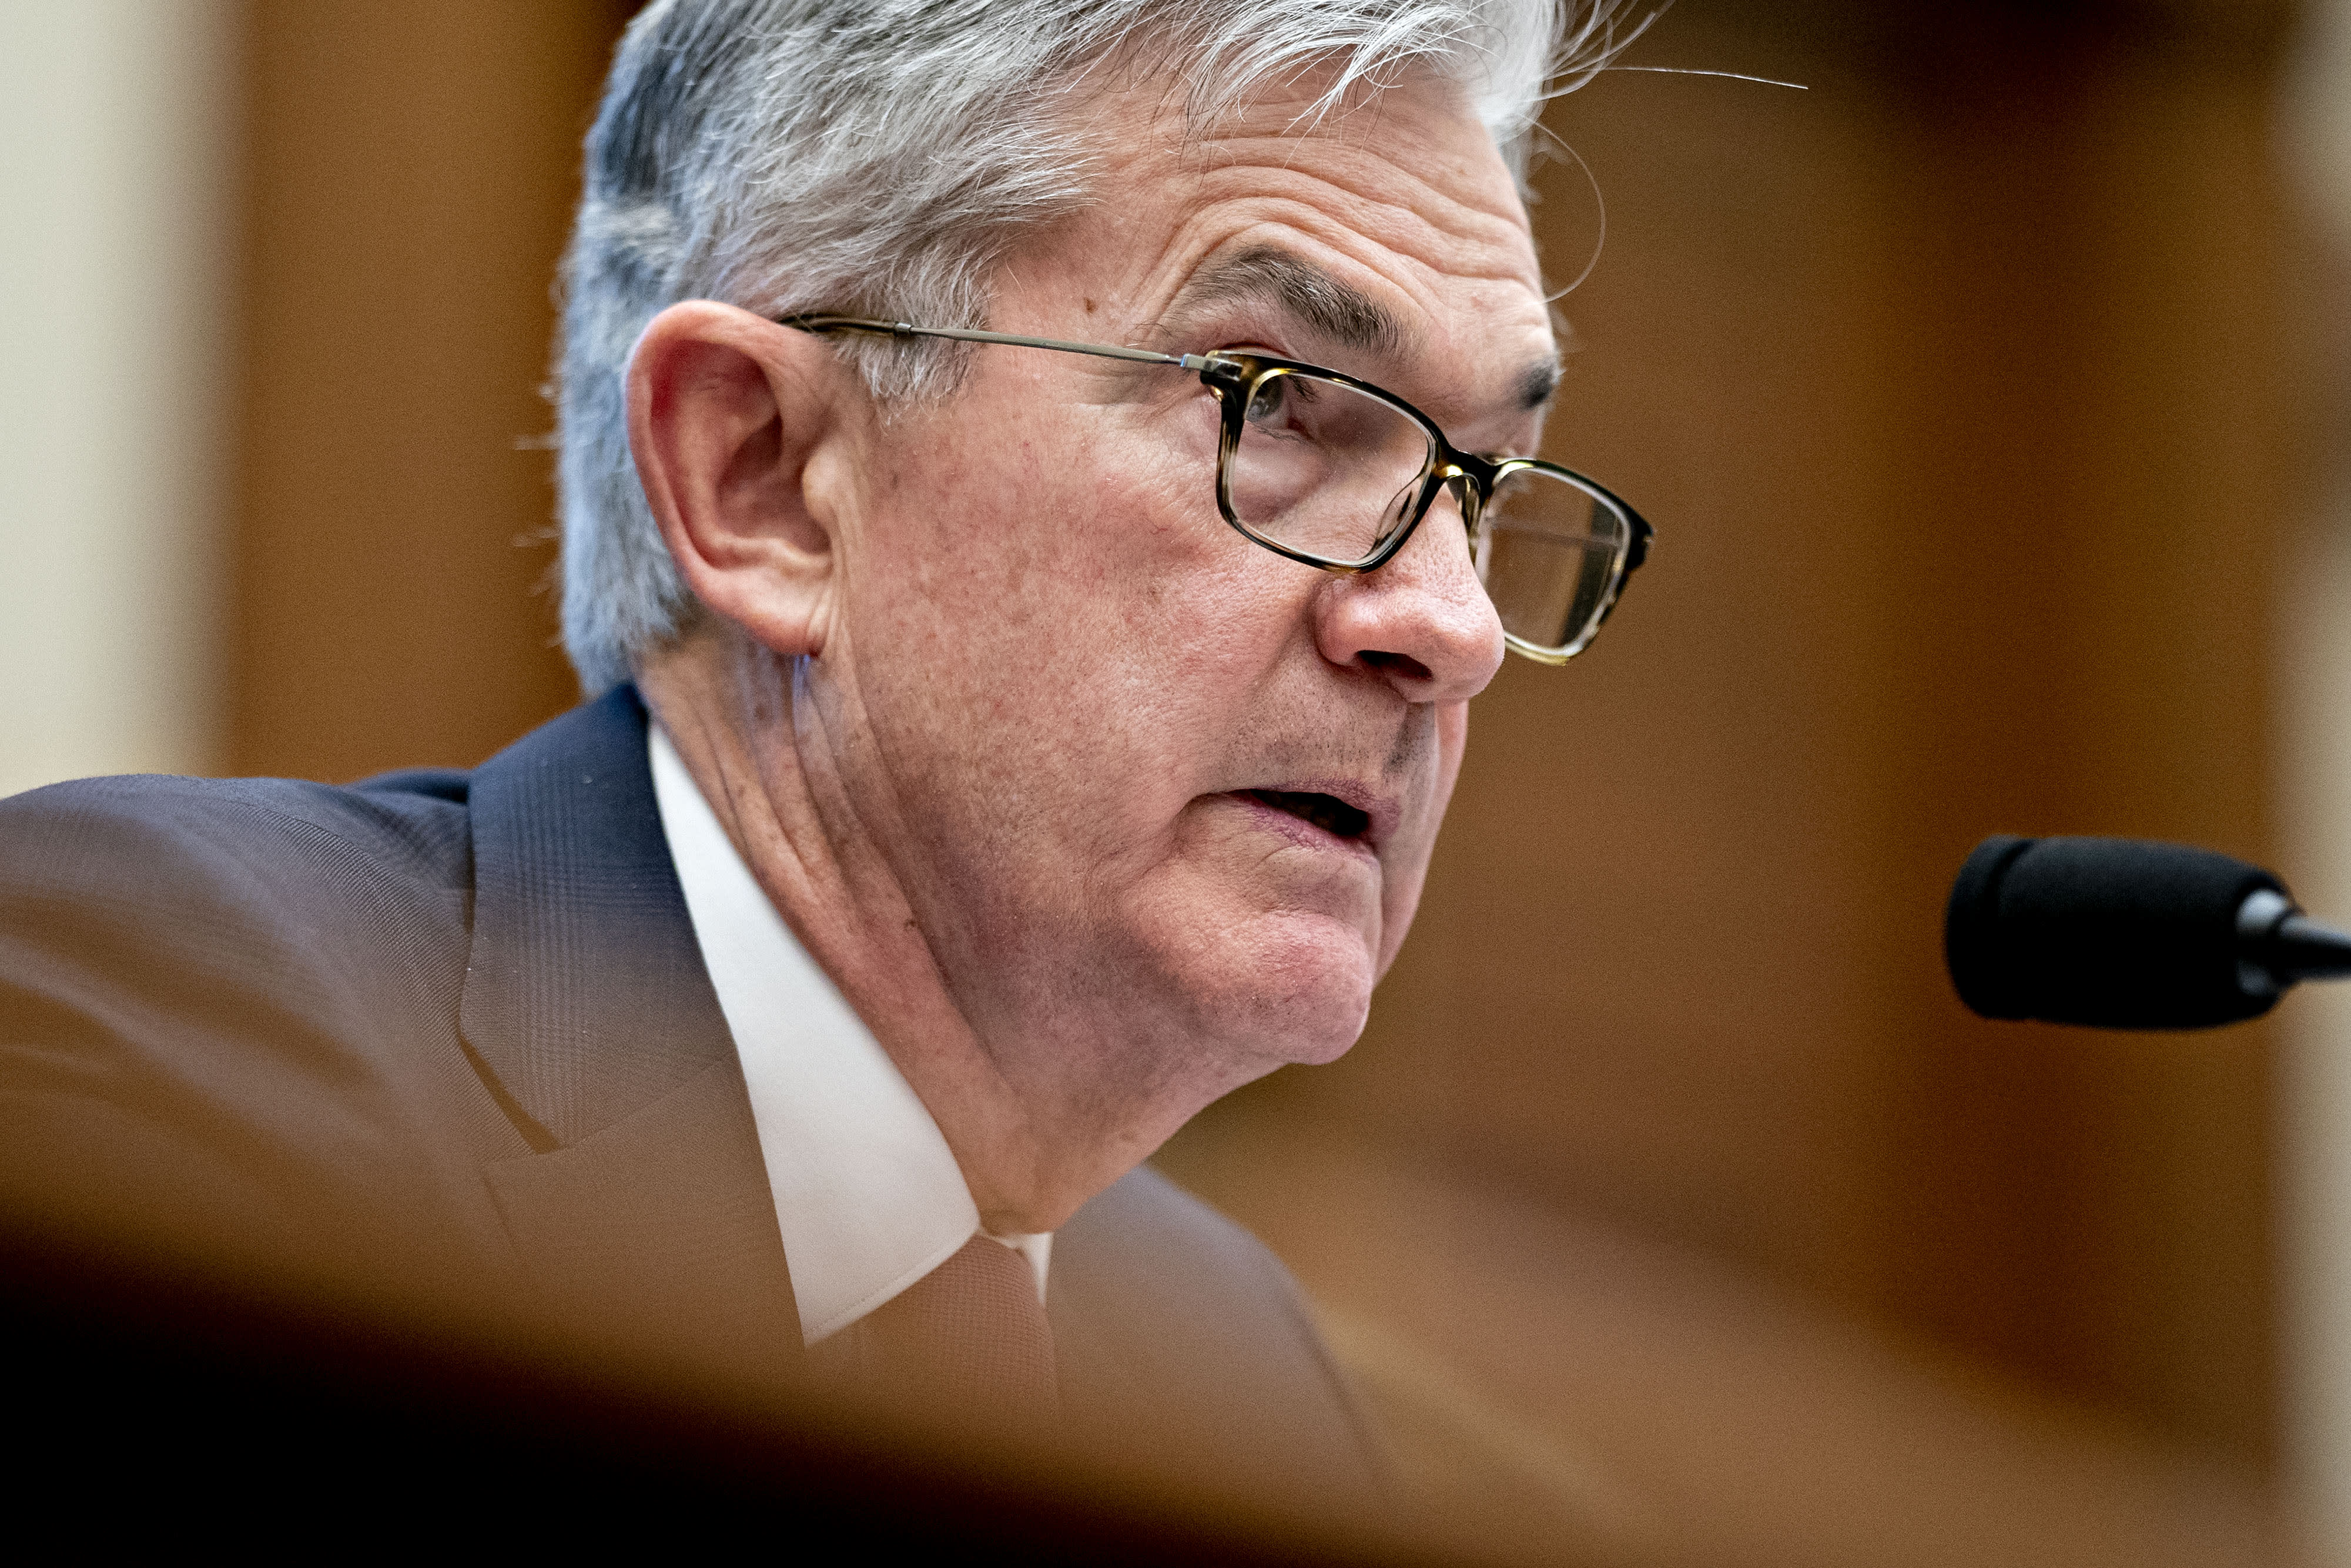 Fed's Powell questioned about systemic risks climate change could pose to the US economy - CNBC